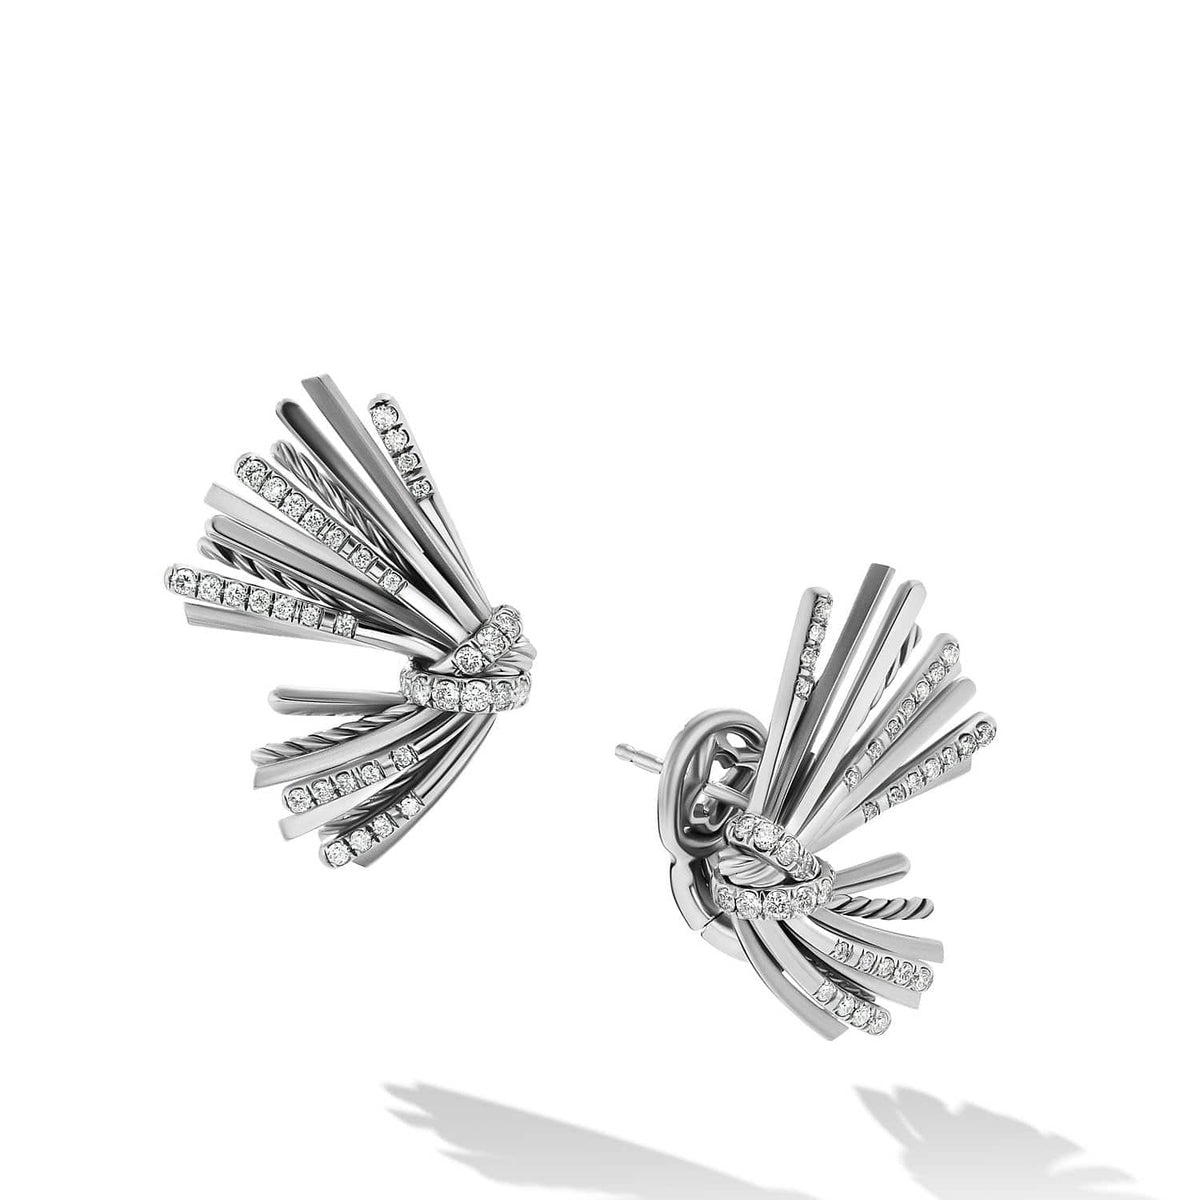 Angelika Flair Earrings with Pavé Diamonds Sterling Silver, Long's Jewelers